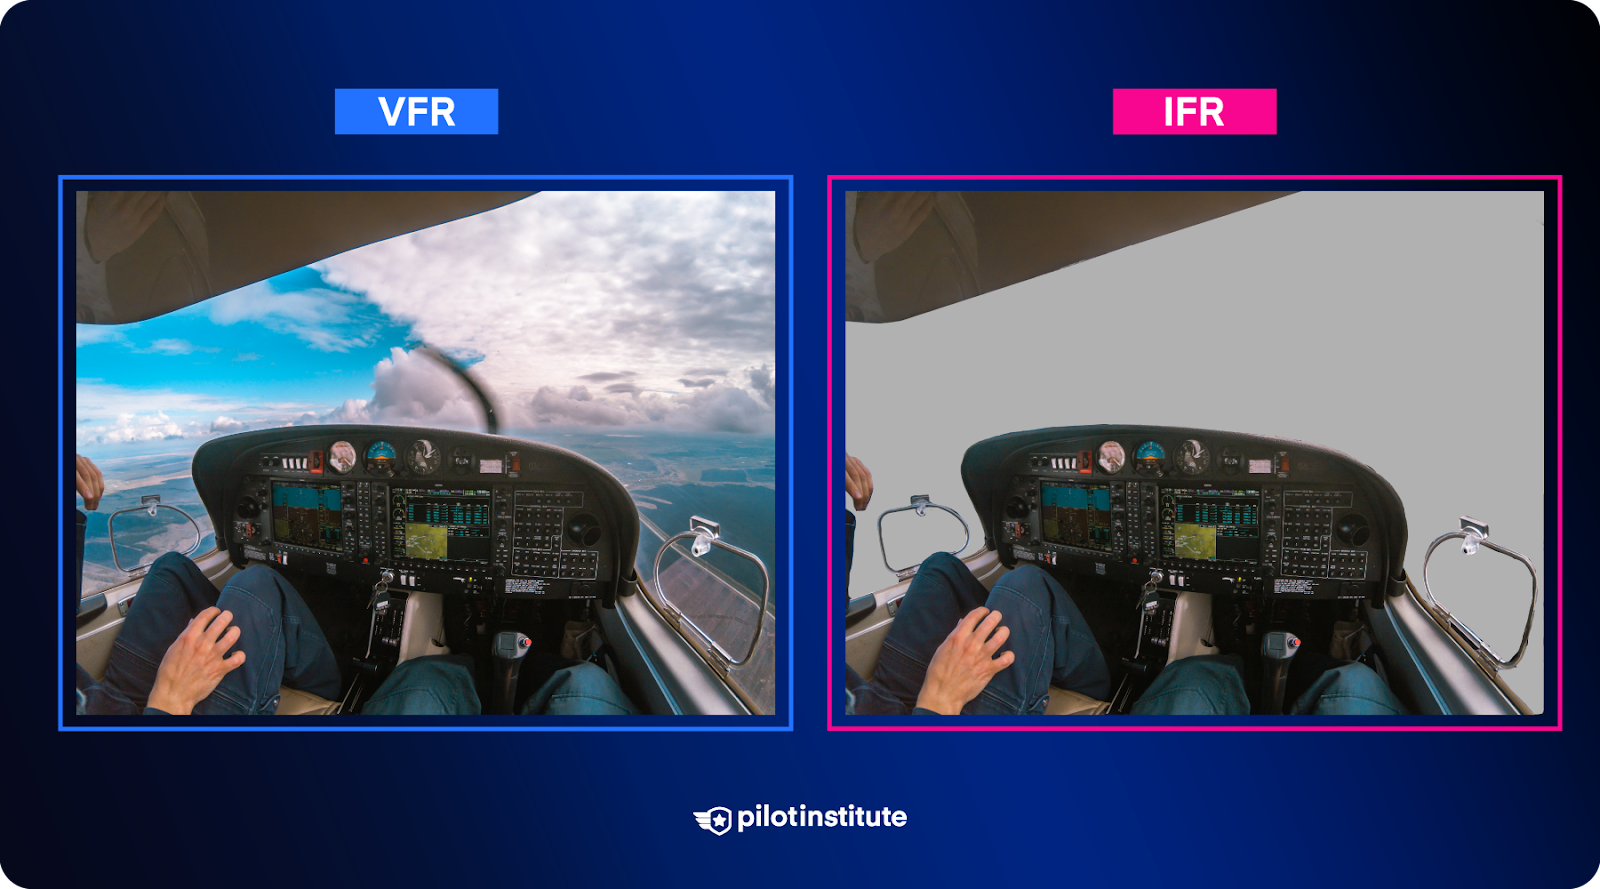 One cockpit image is in visual conditions and the other is in instrument conditions.